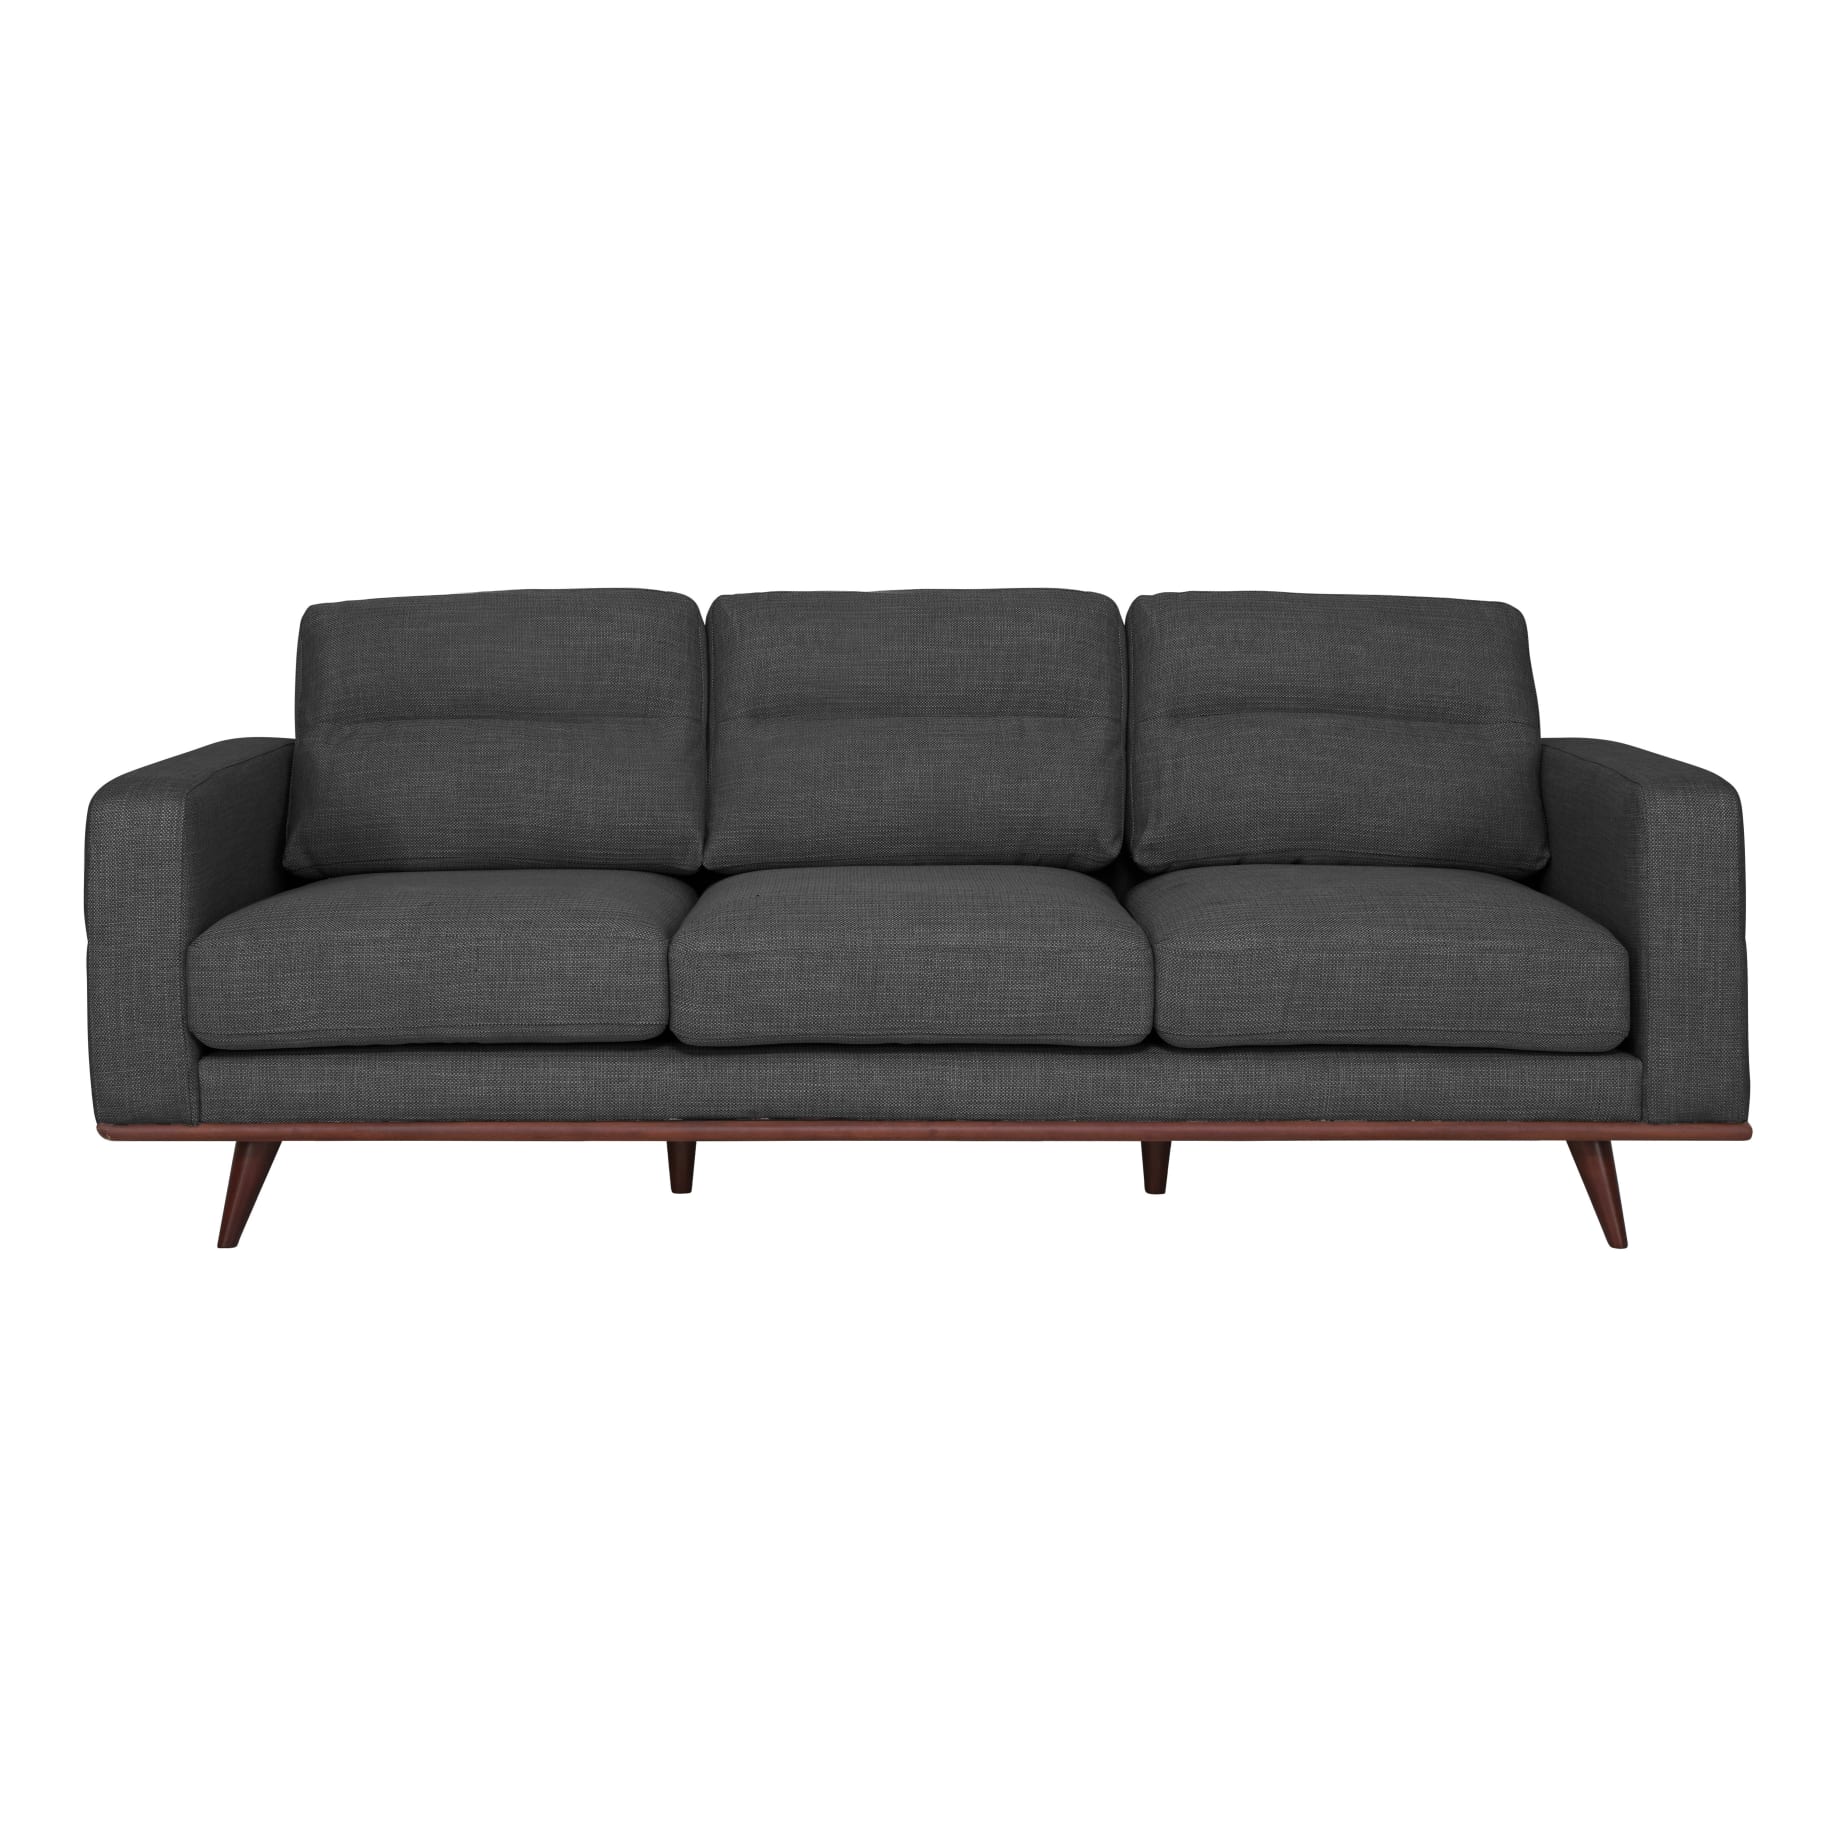 Astrid 3 Seater Sofa in Talent Charcoal